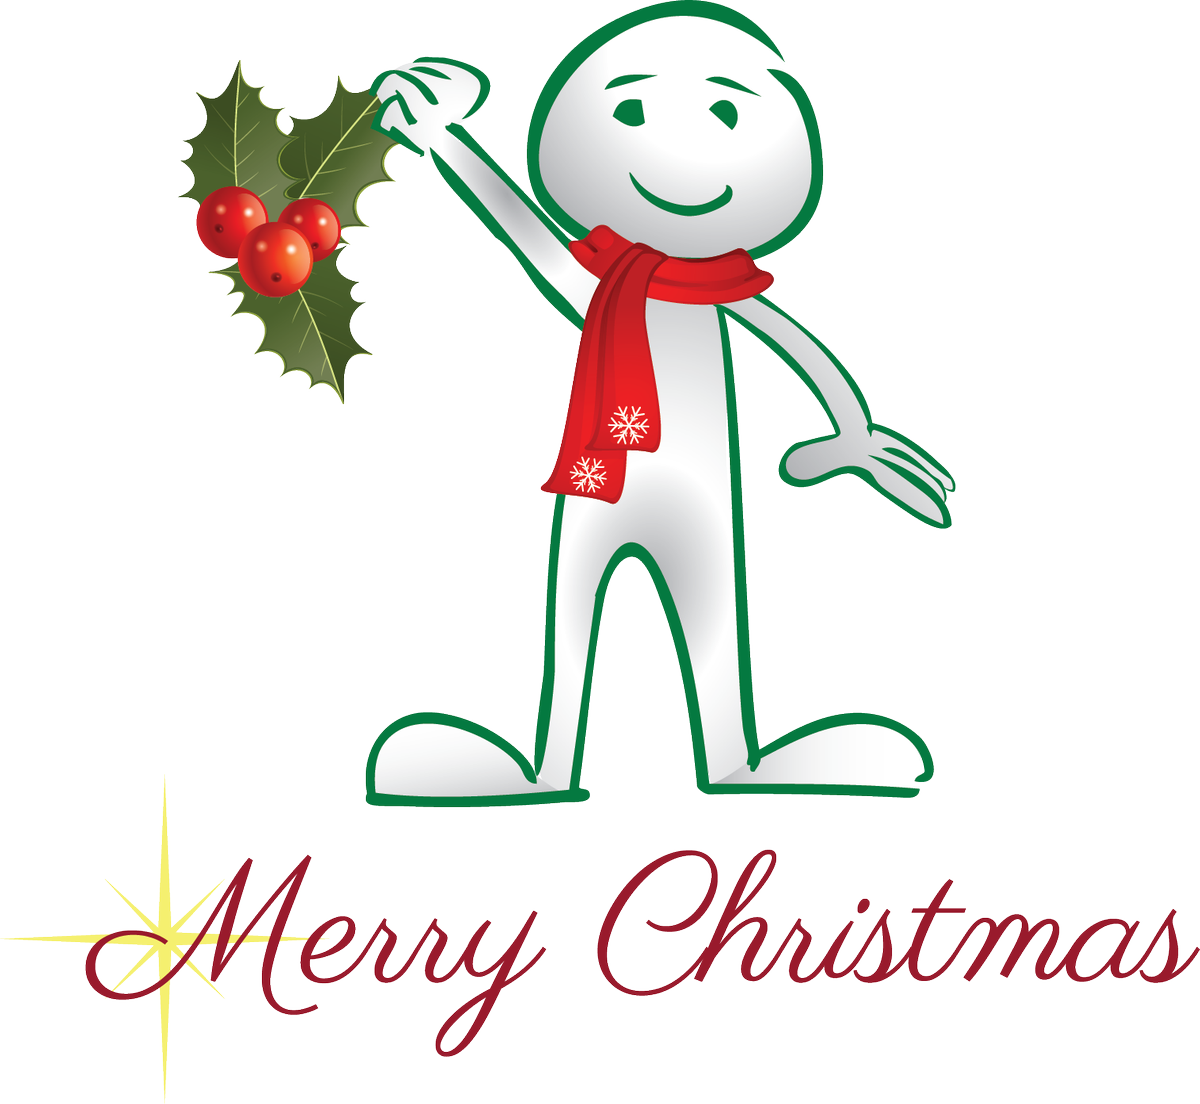 Thank You From Our Families To Yours, We Wish You A - Christmas Is Near Sticker (1200x1104)